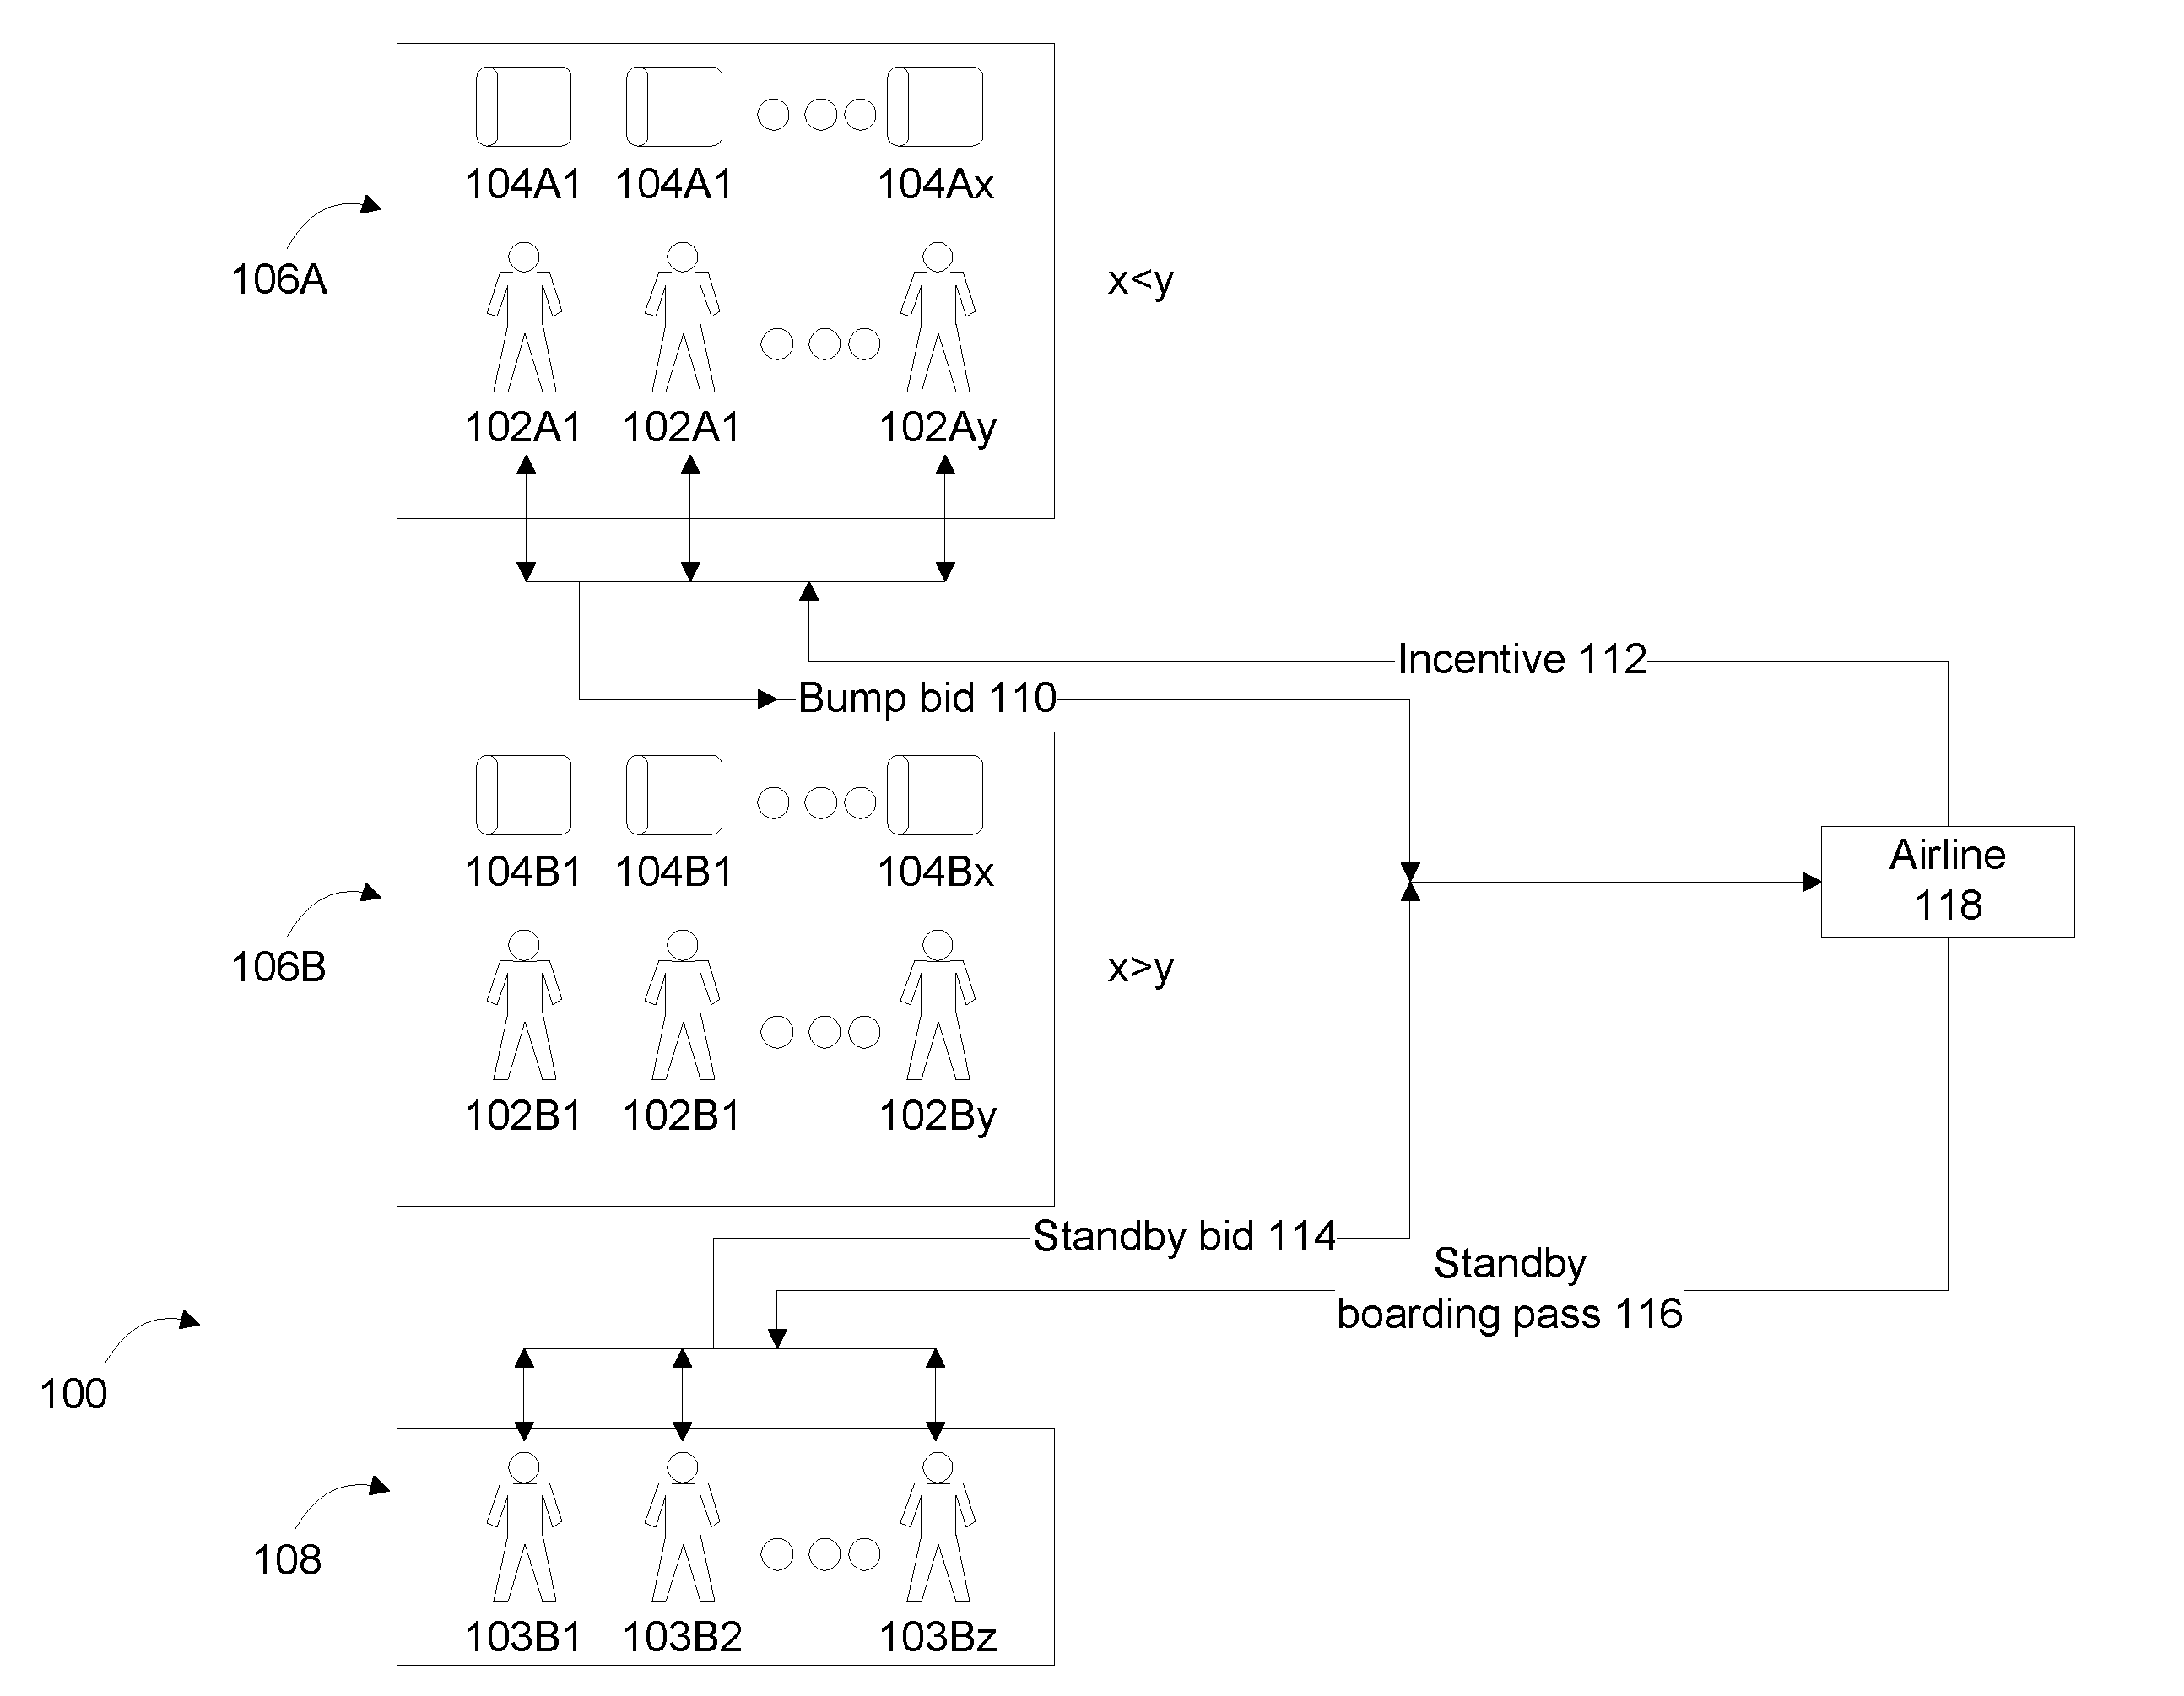 System and method for boarding passengers based on bids